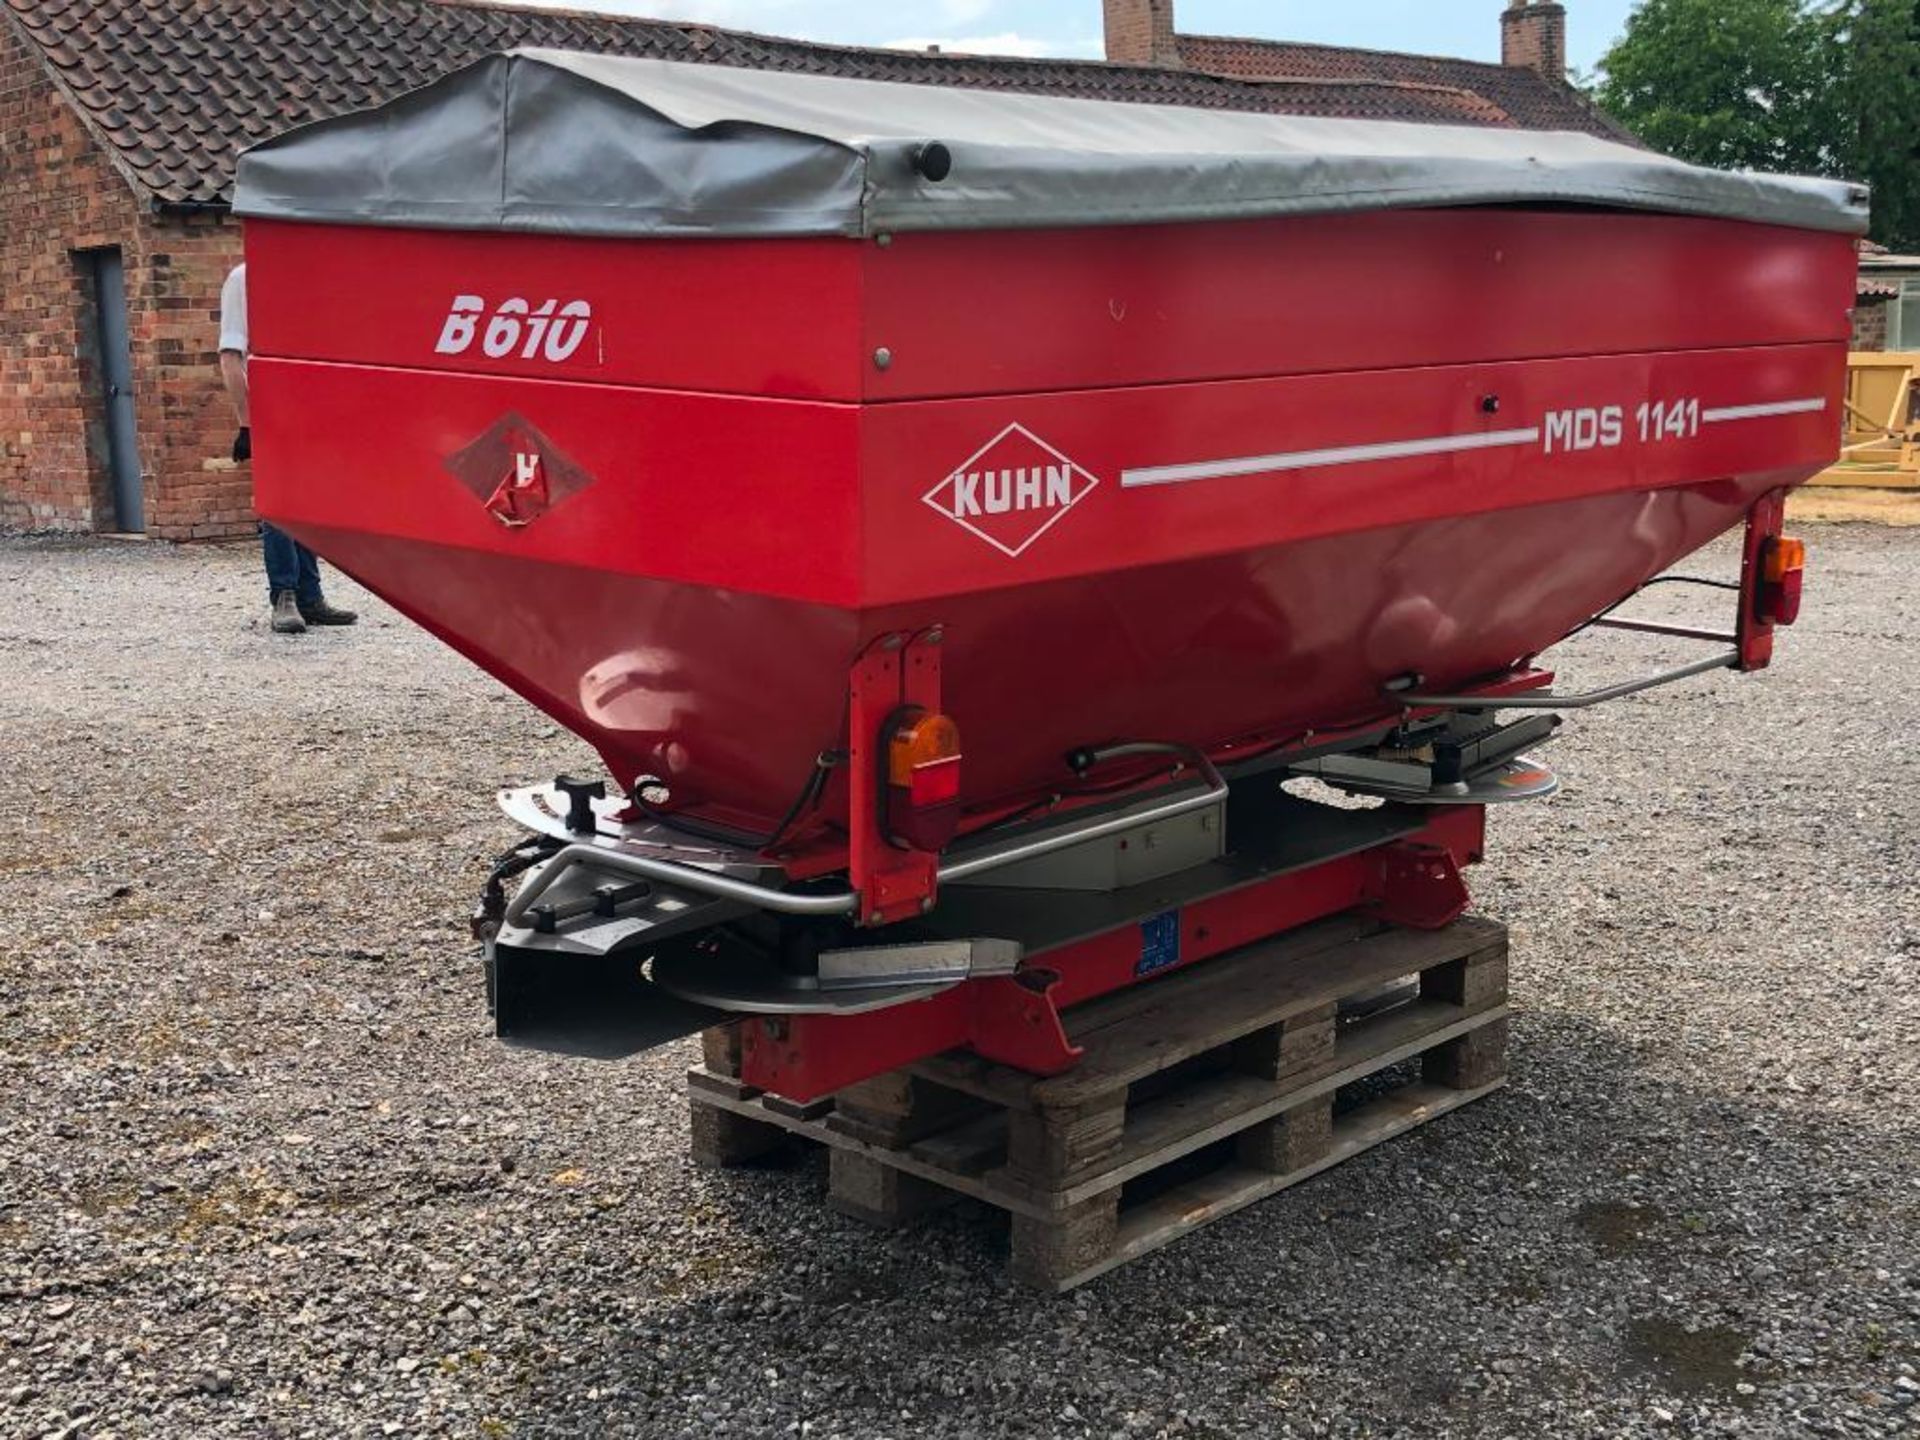 1997 Kuhn MDS 1141 20m twin disc fertiliser spreader with B610 hopper extension, comes with addition - Image 5 of 12